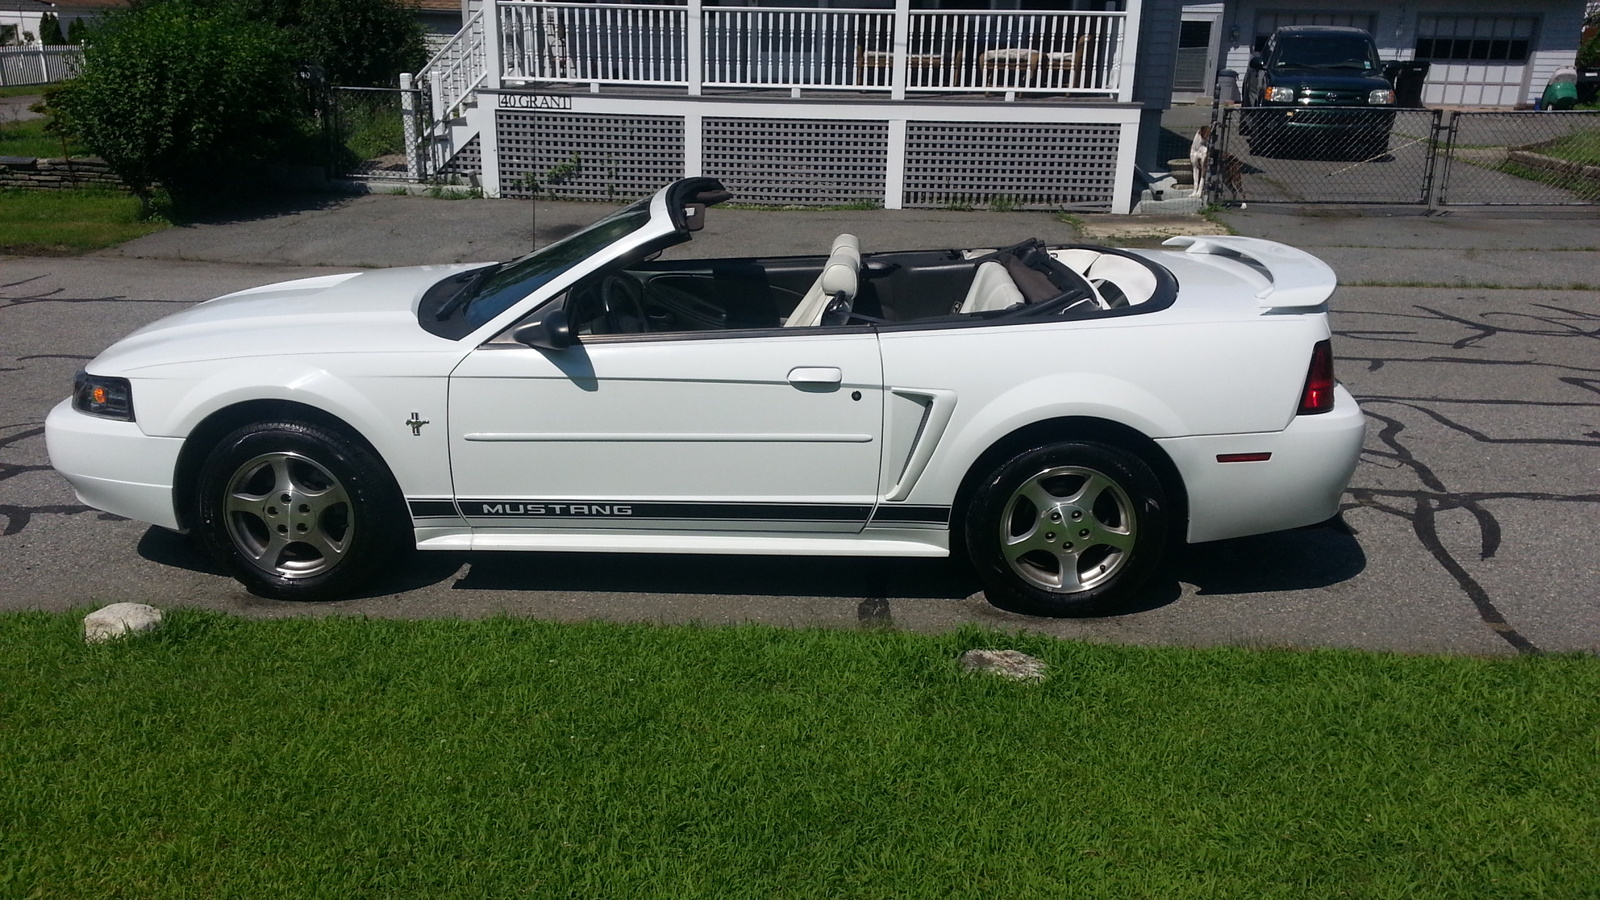 2002 Ford mustang deluxe convertible reviews #4